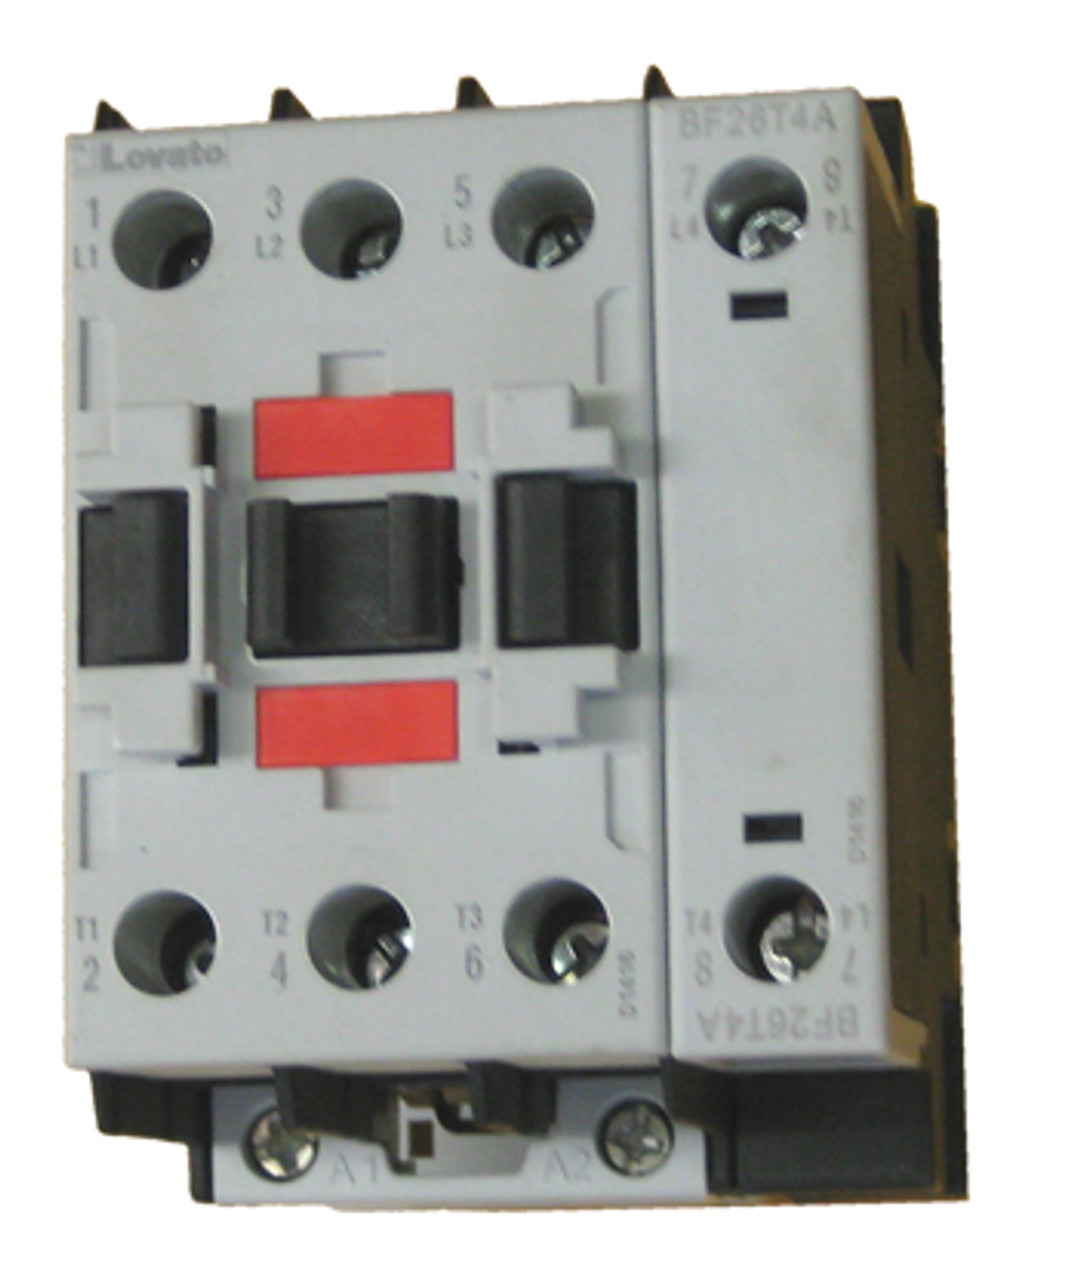 Lovato Bf26t4a 12060 45 Amp 4 Pole Contactor With A 120vac Coil